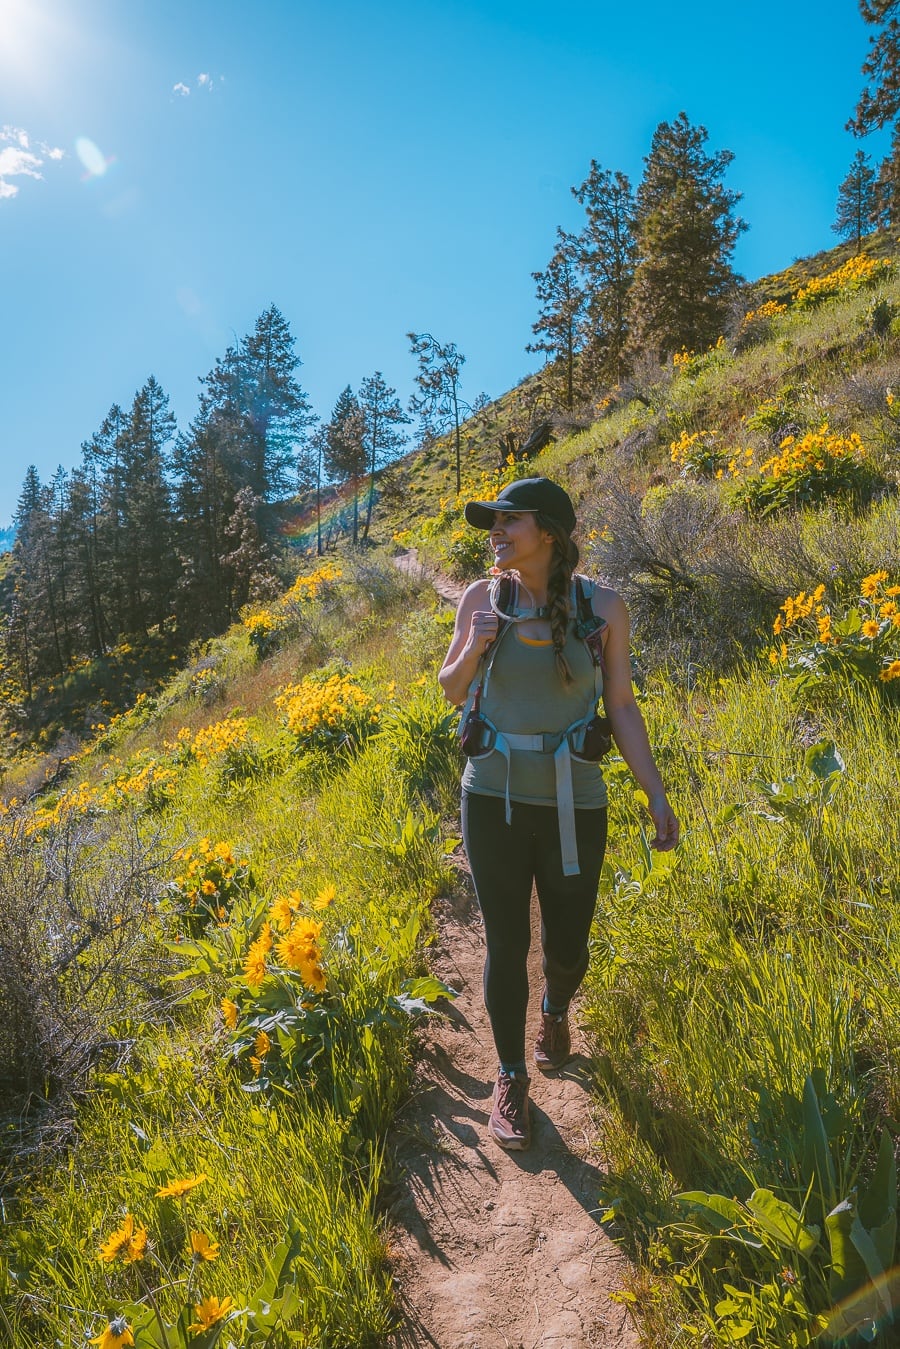 What to Wear Hiking: Clothing for Men and Women - Cool of the Wild